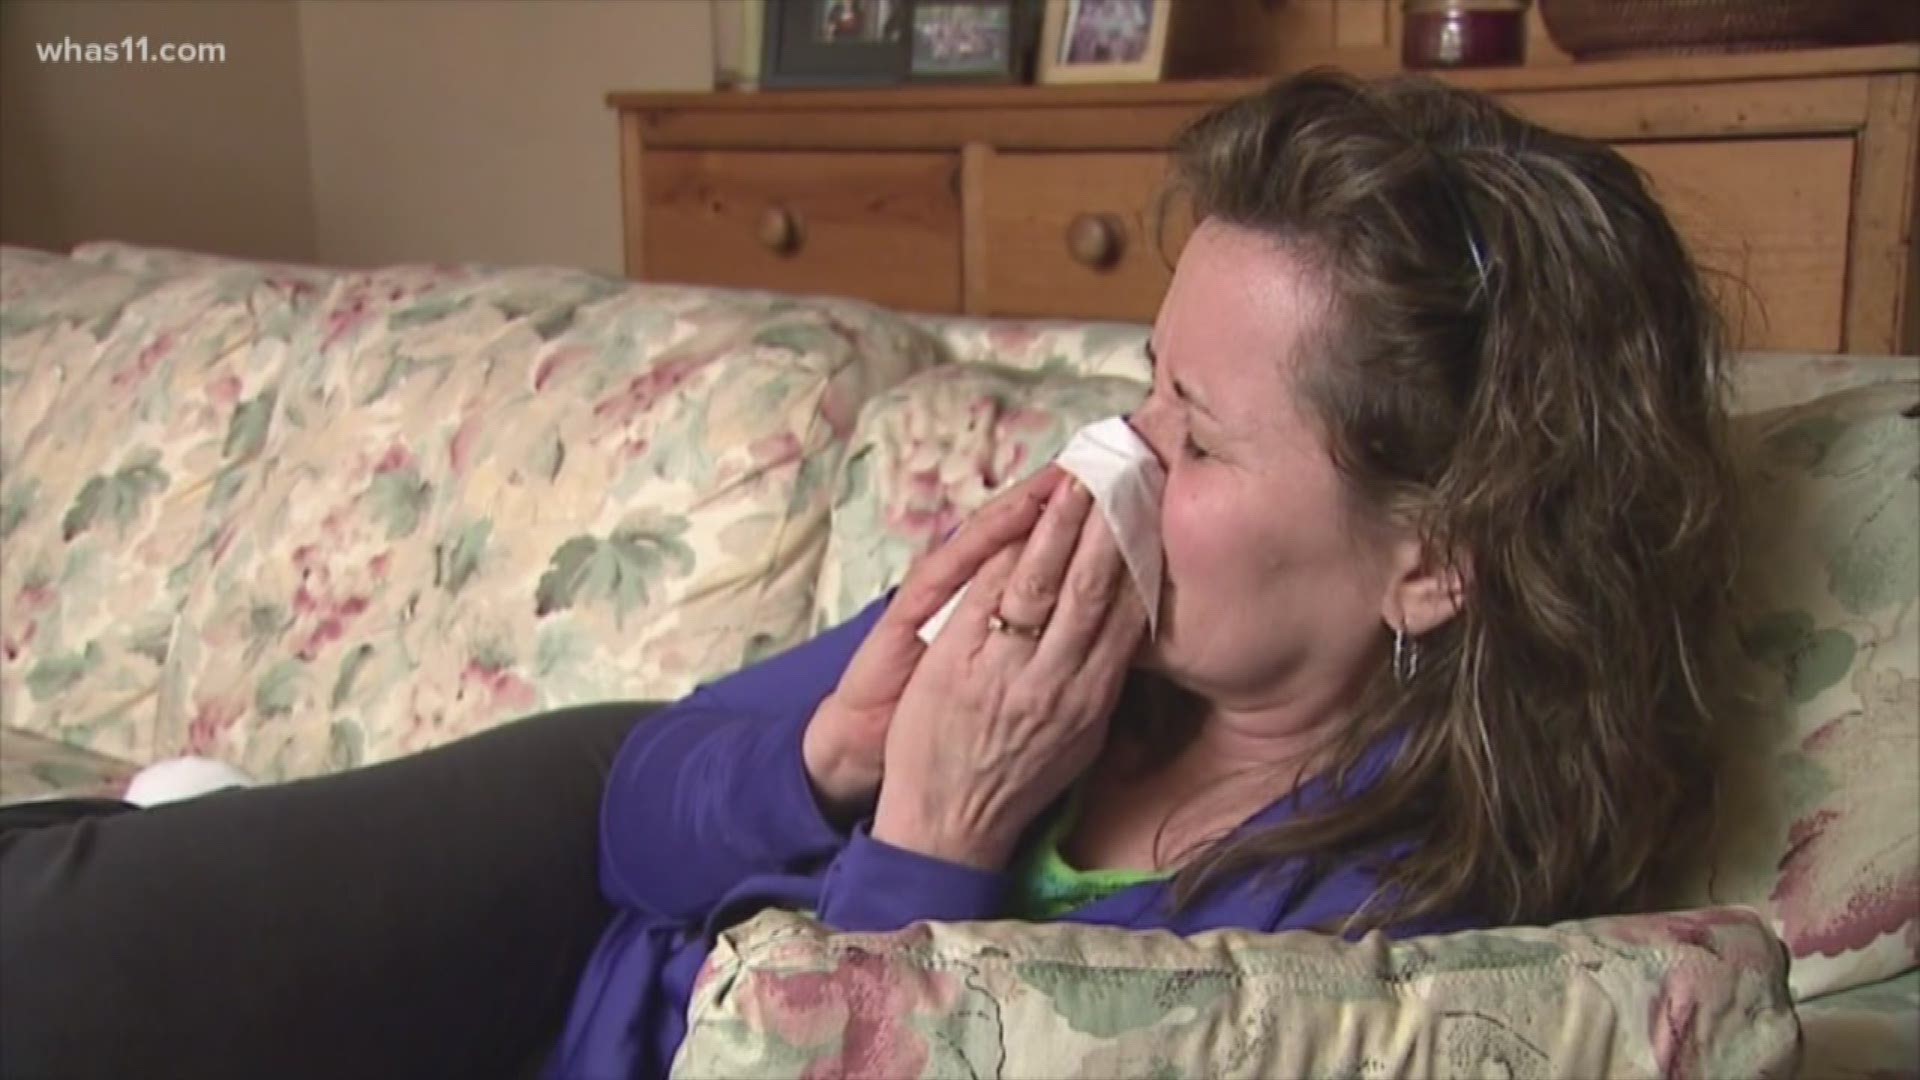 Doctors are hoping this year's flu season is not as devastating as the last.